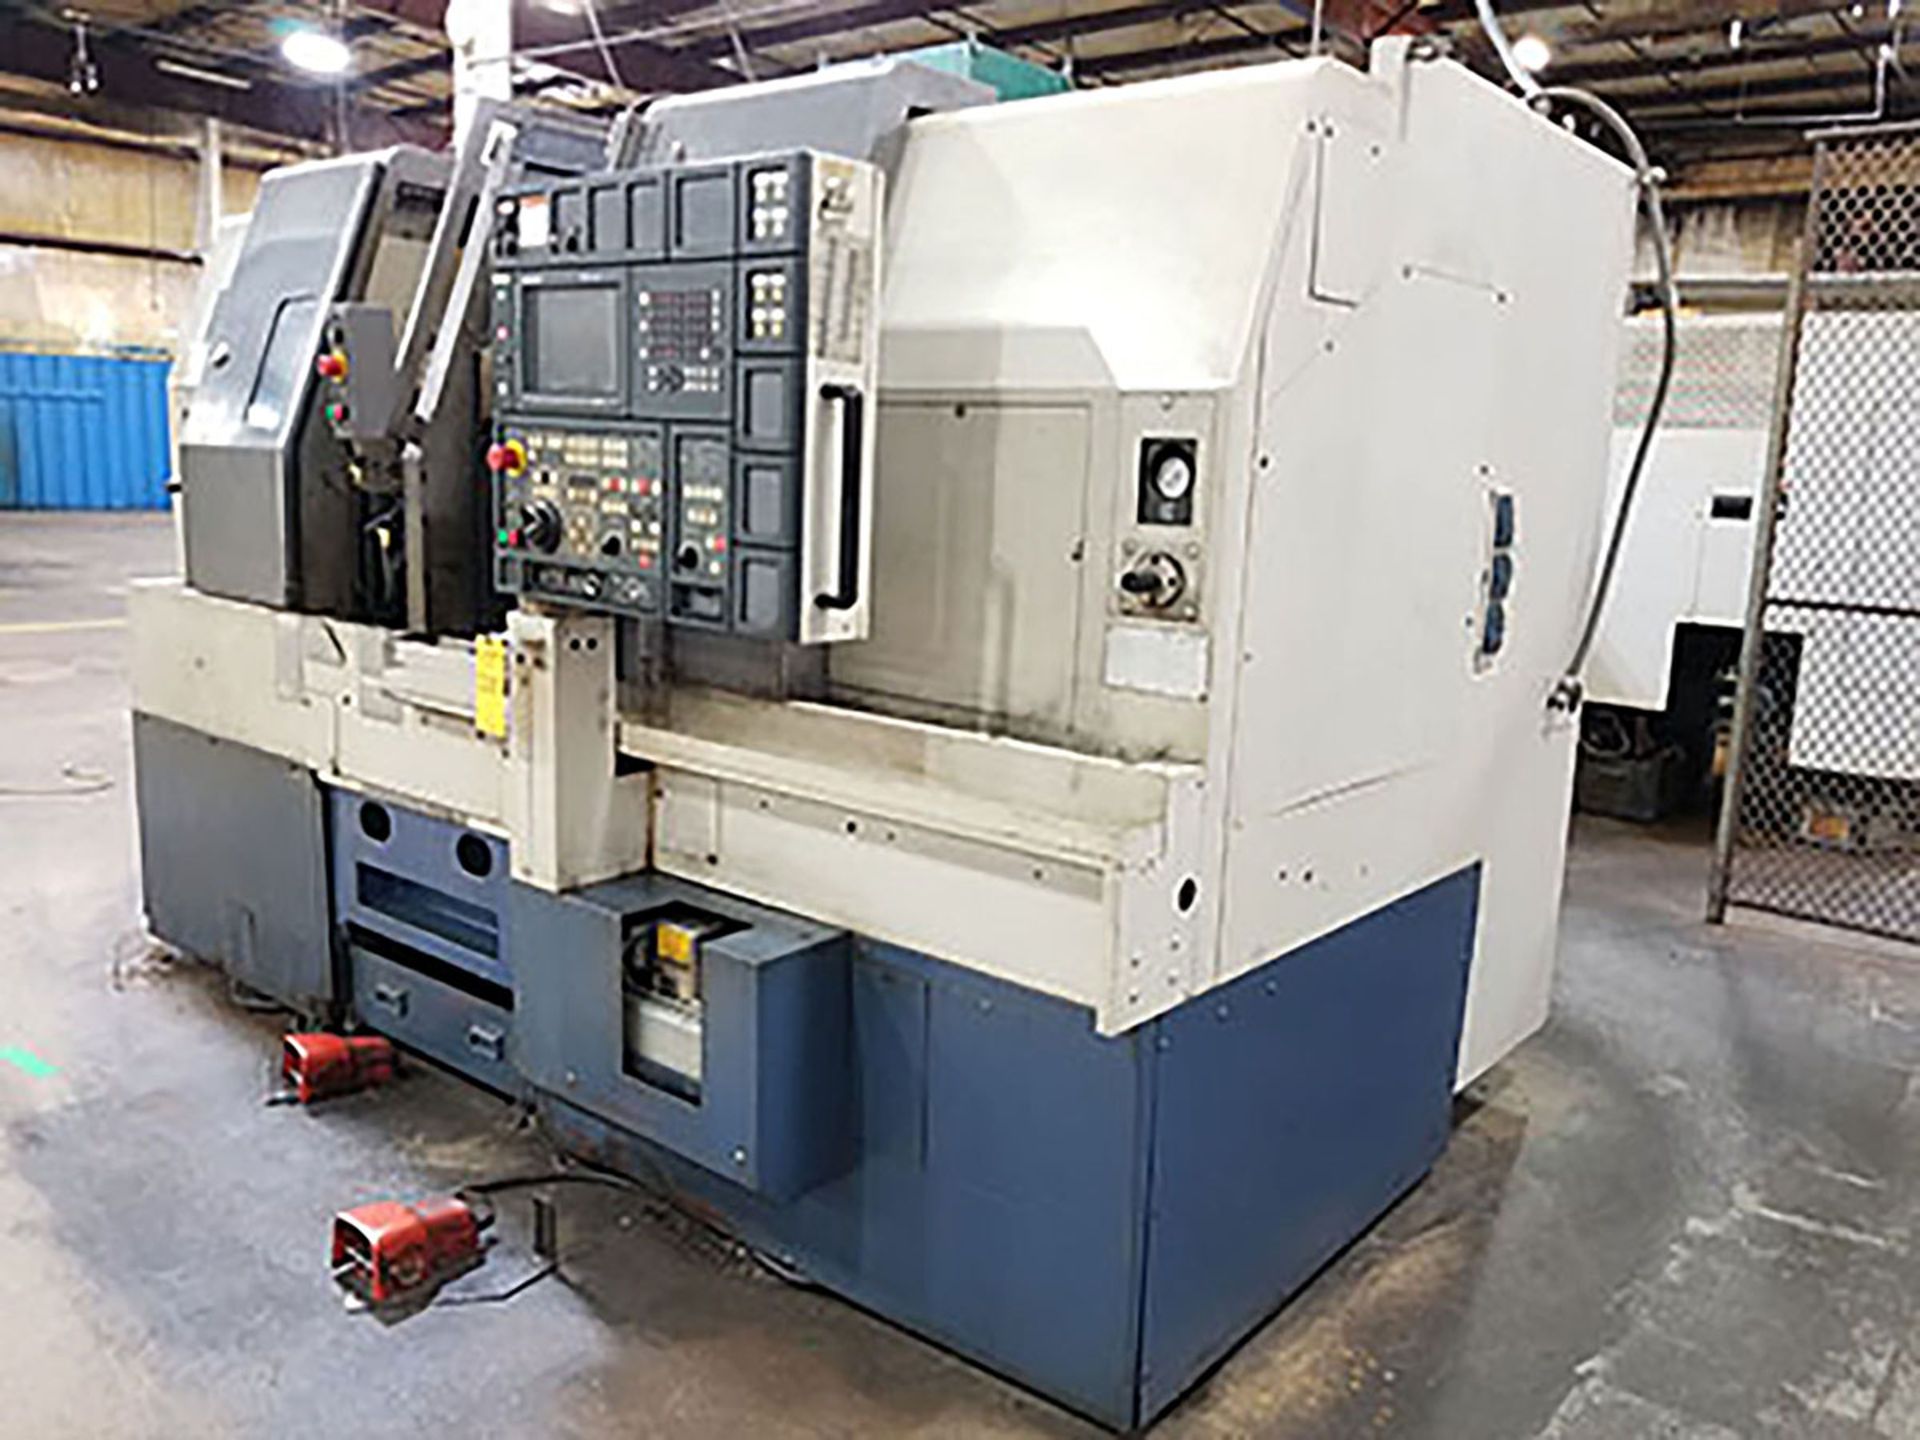 2000 MORI SEKI DL151 4-AXIS CNC TURNING CENTER; DUAL SPINDLE, (2) 12-POSITION TURRET, COOLANT, - Image 9 of 10